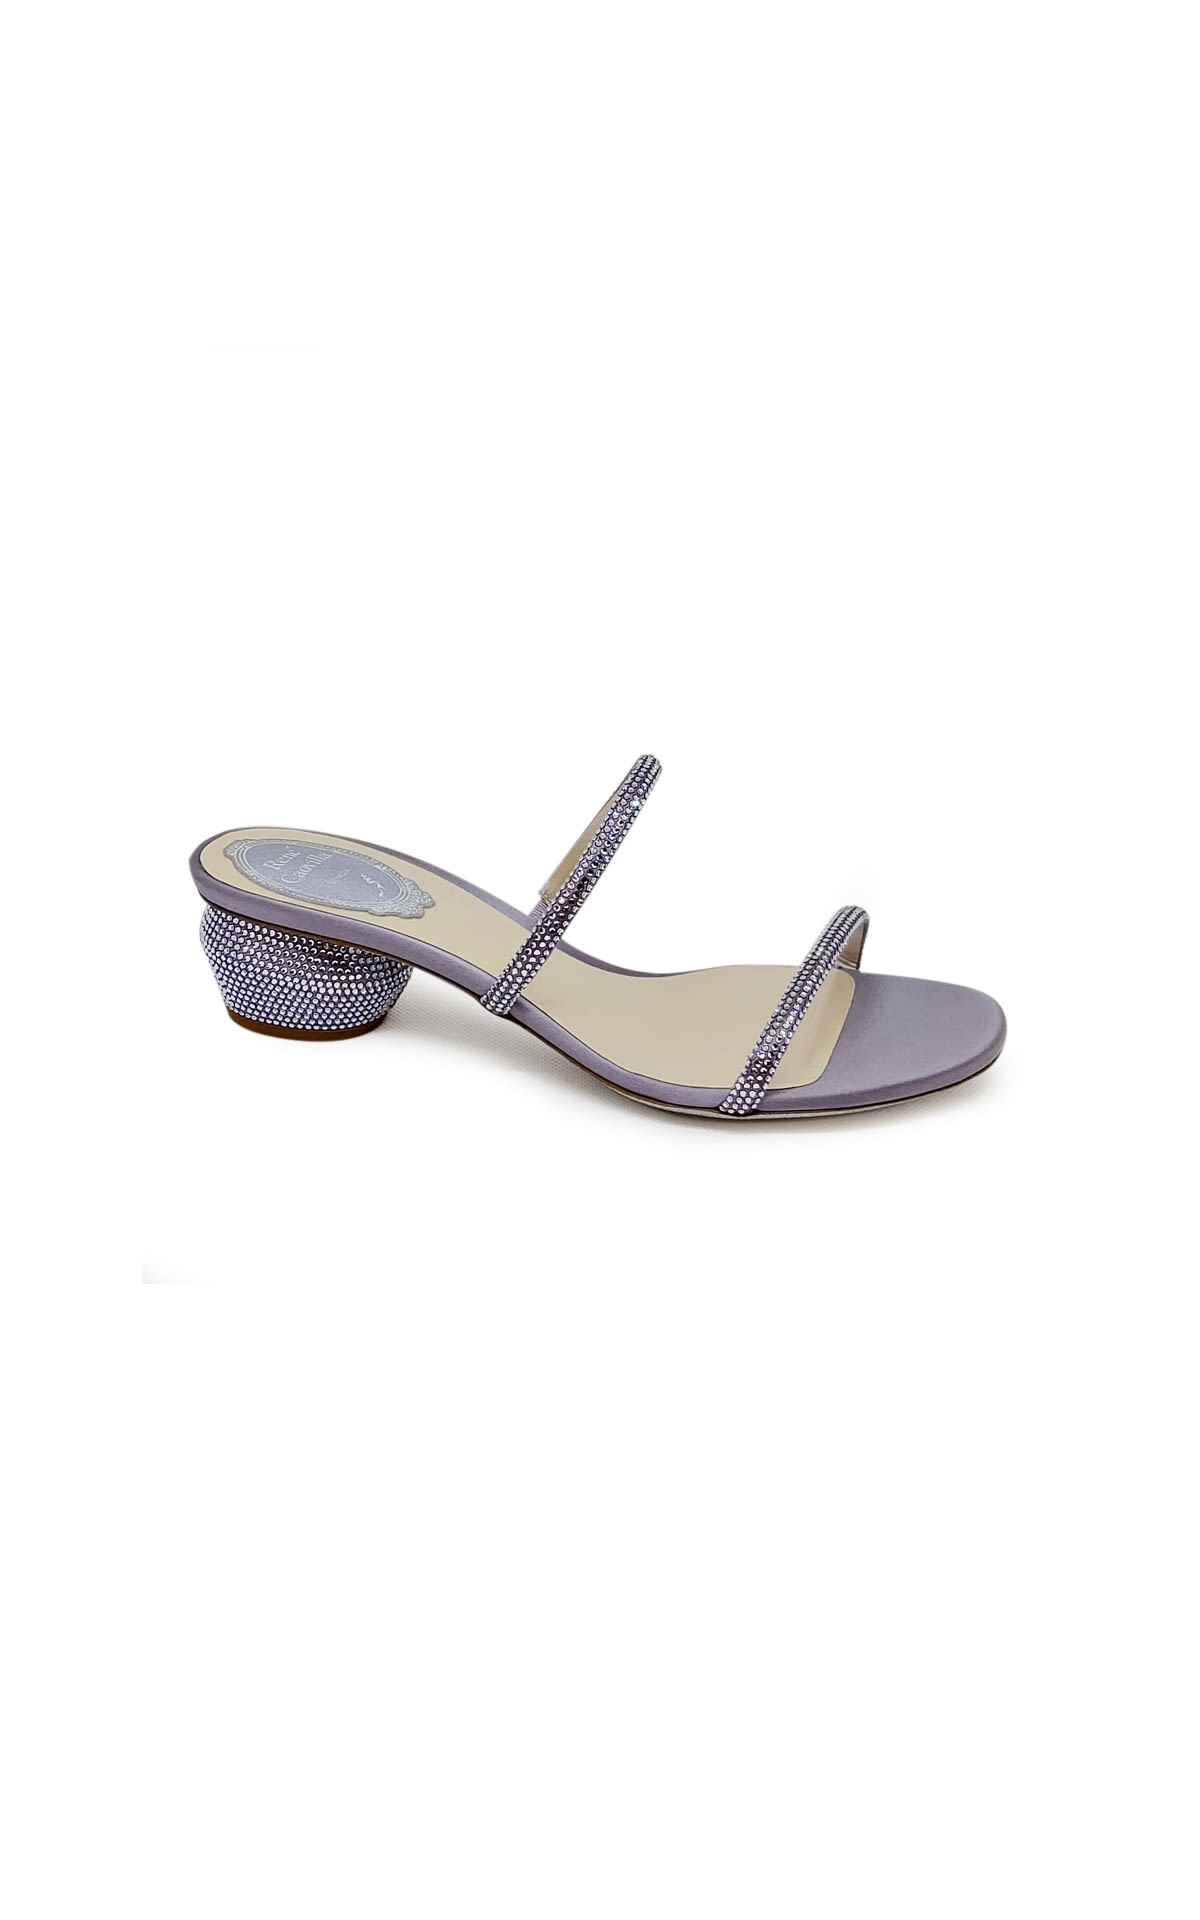 Bessie sandals in satin lilac color